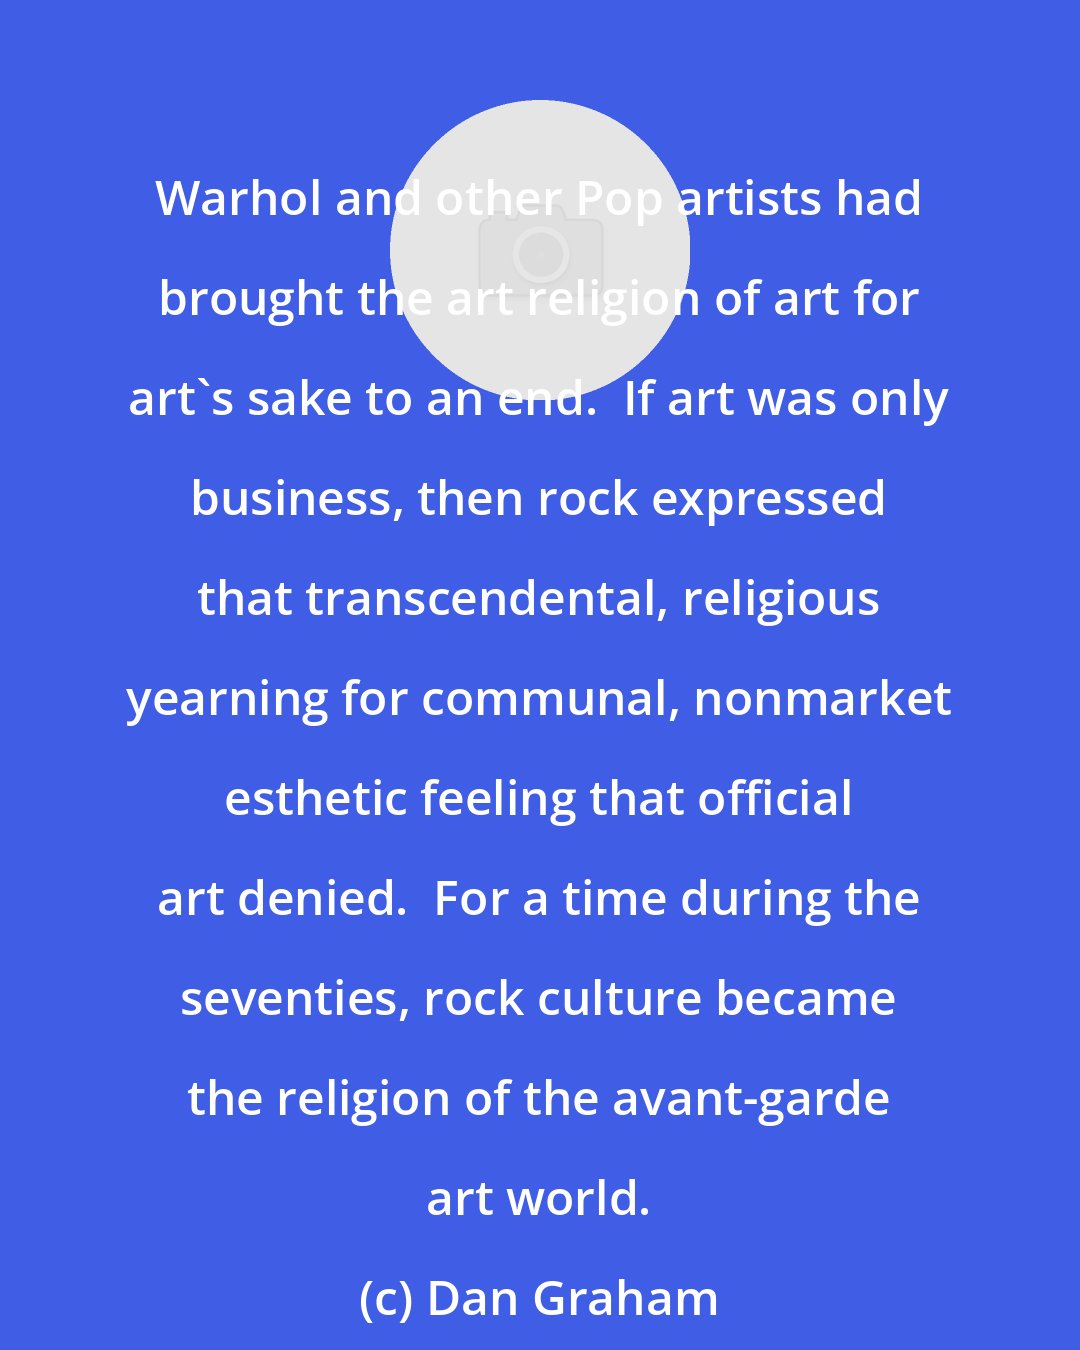 Dan Graham: Warhol and other Pop artists had brought the art religion of art for art's sake to an end.  If art was only business, then rock expressed that transcendental, religious yearning for communal, nonmarket esthetic feeling that official art denied.  For a time during the seventies, rock culture became the religion of the avant-garde art world.